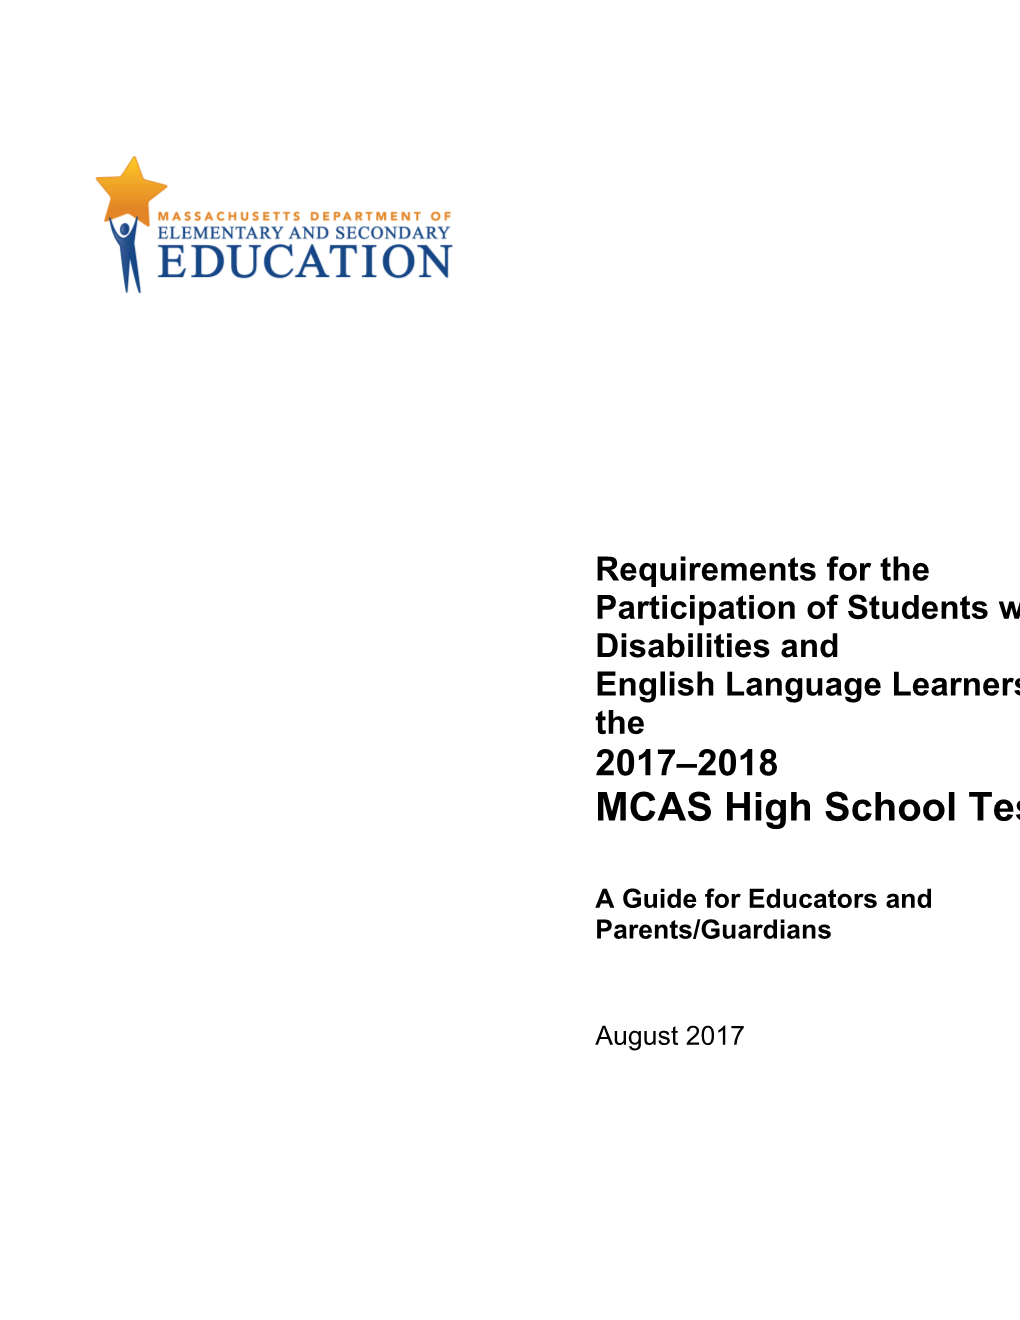 Requirements for the Participation of Students with Disabilities and English Language Learners